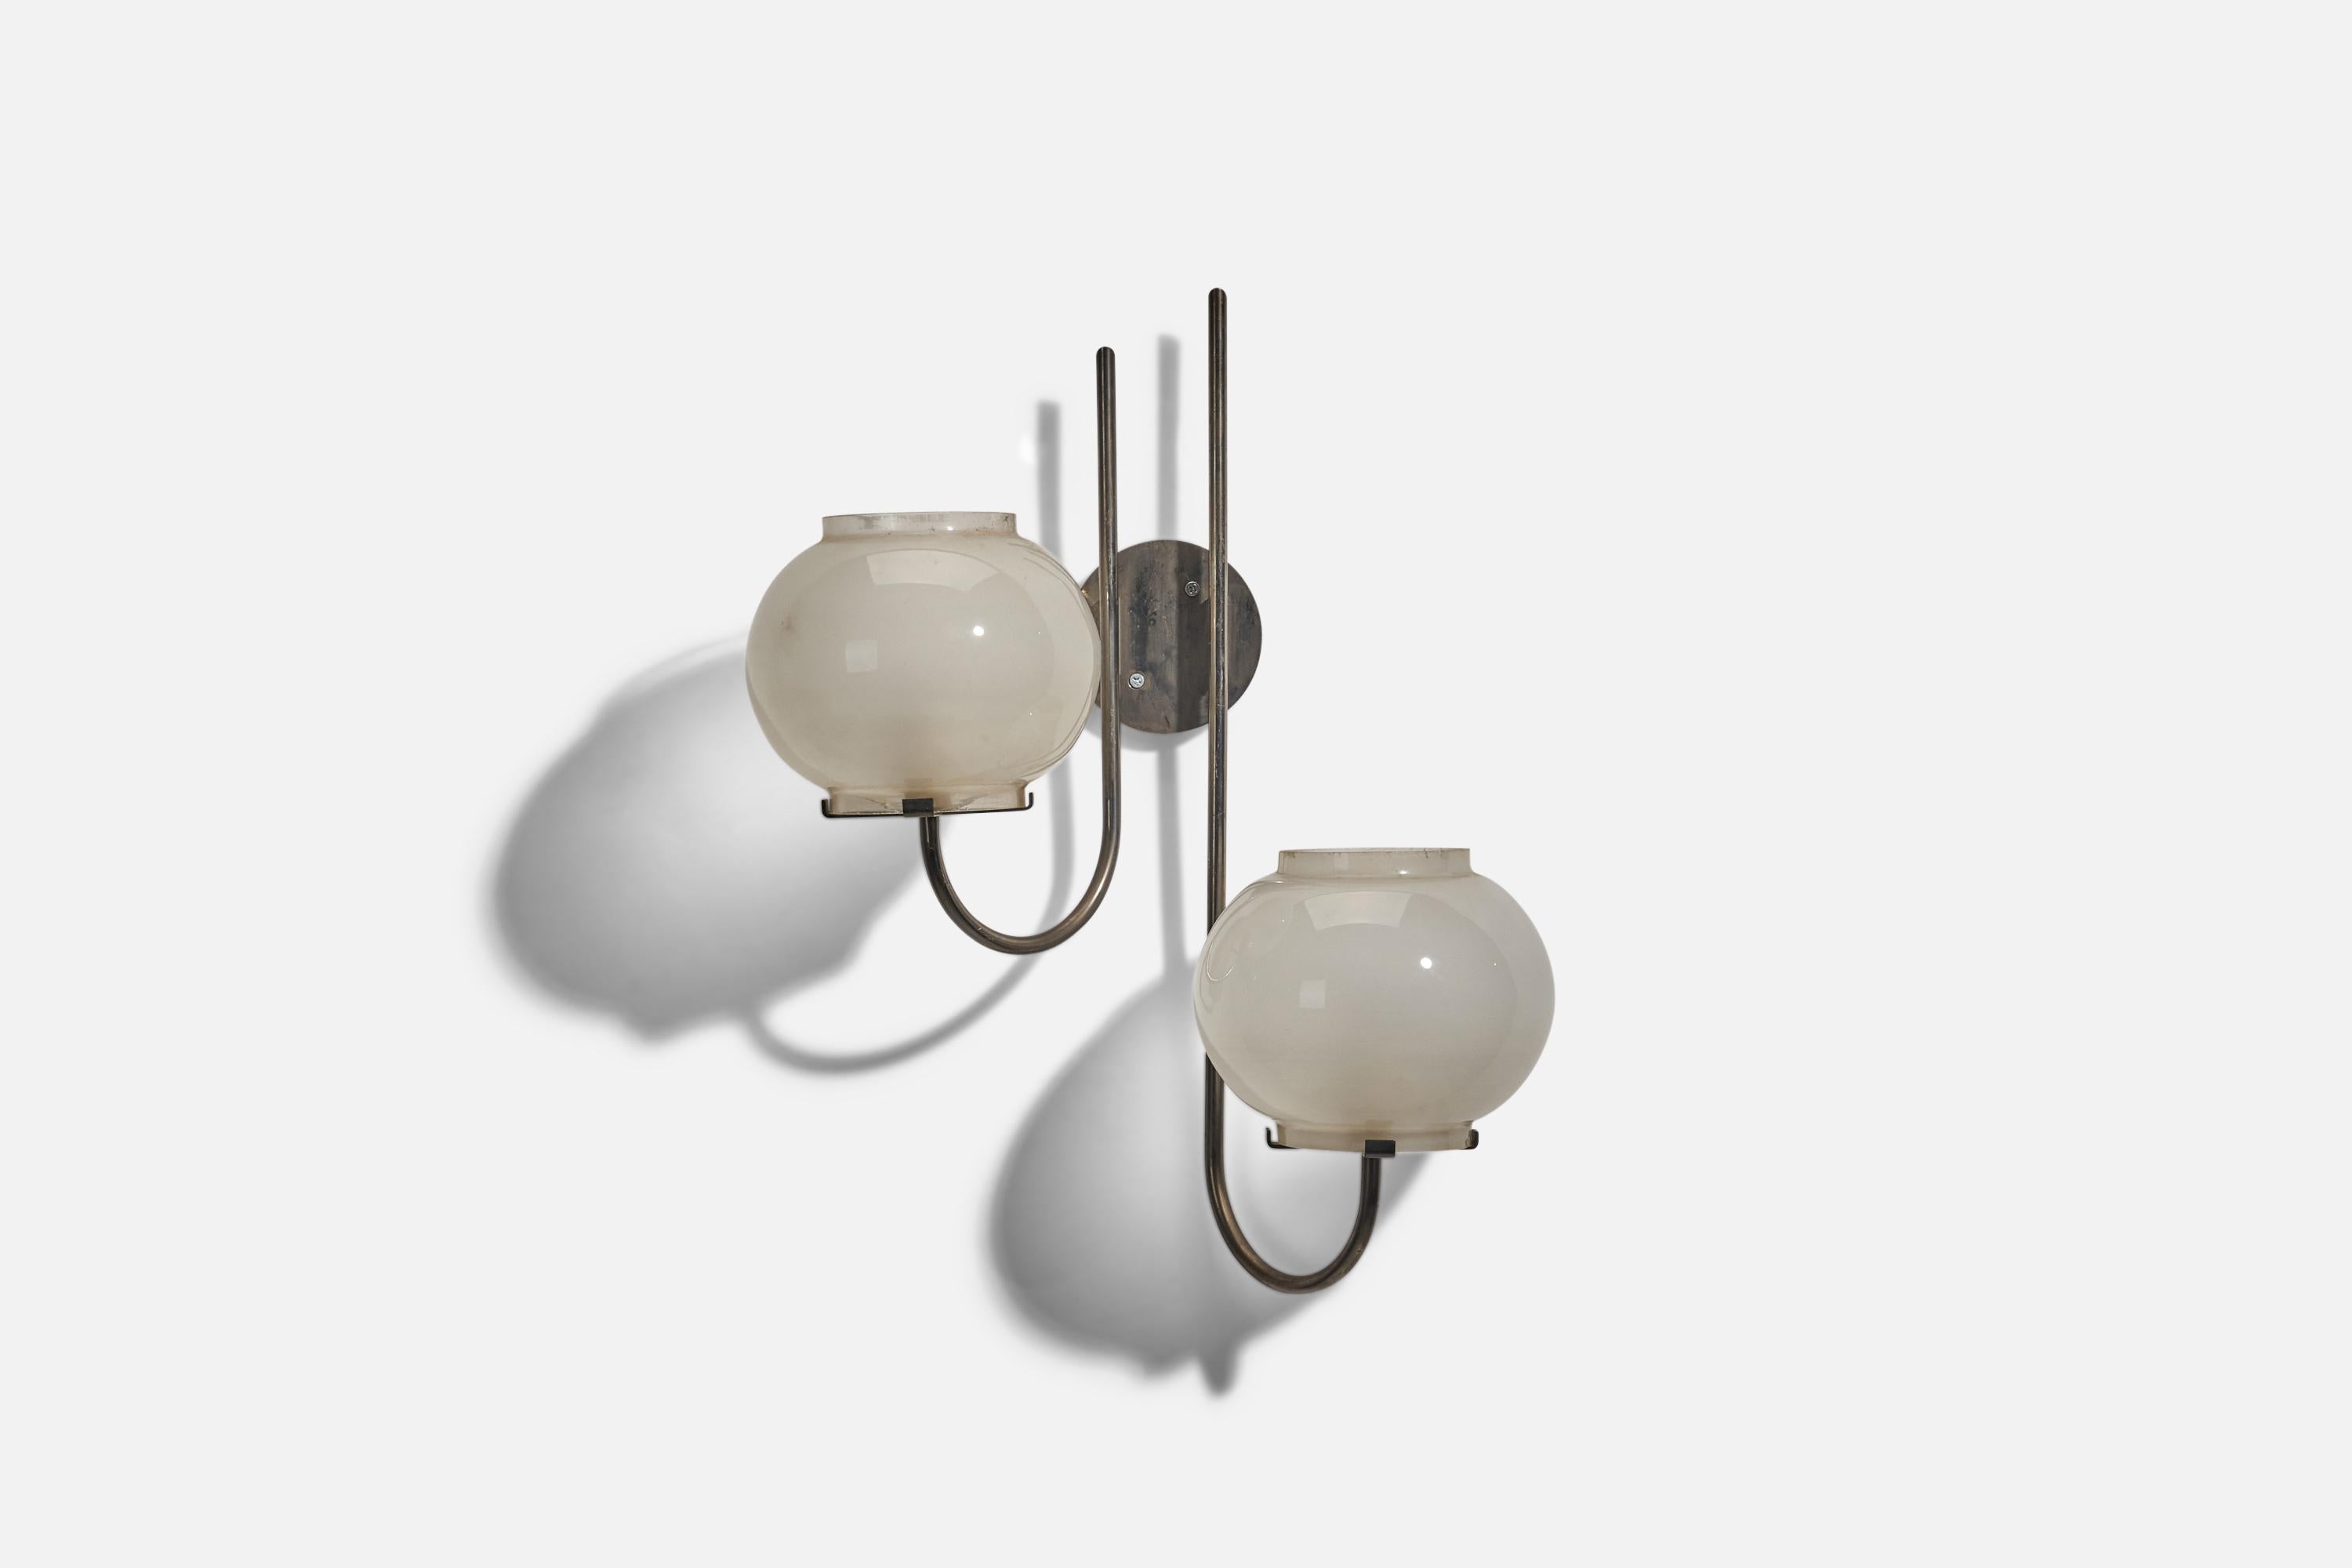 A metal and glass sconce designed by Tito Agnoli and produced by O-Luce, Italy, 1961.

Dimensions of back plate (inches) : 3.93 x 3.93 x 0.63 (height x width x depth).

Sockets take E-14 bulbs.

There is no maximum wattage stated on the